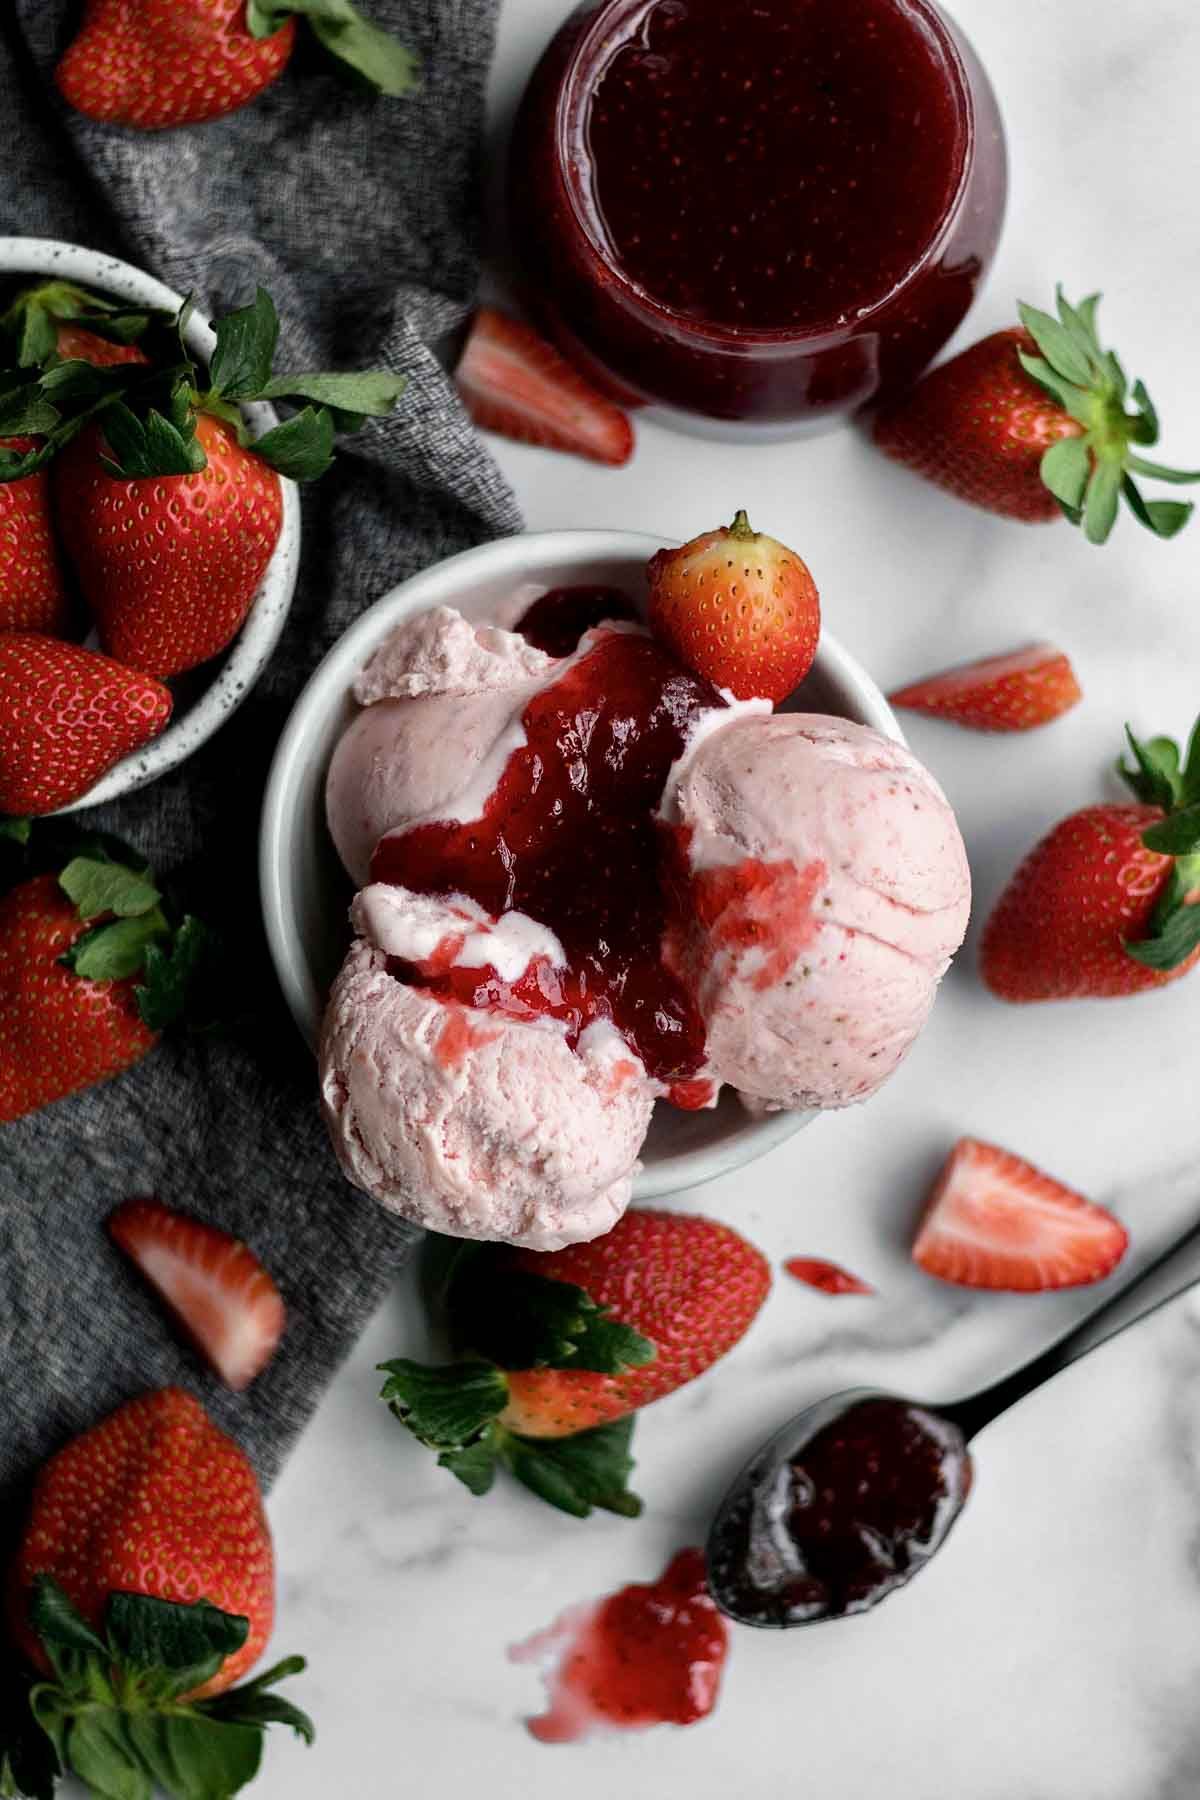 Mouth-watering Strawberry Ice Cream in a small white bowl.